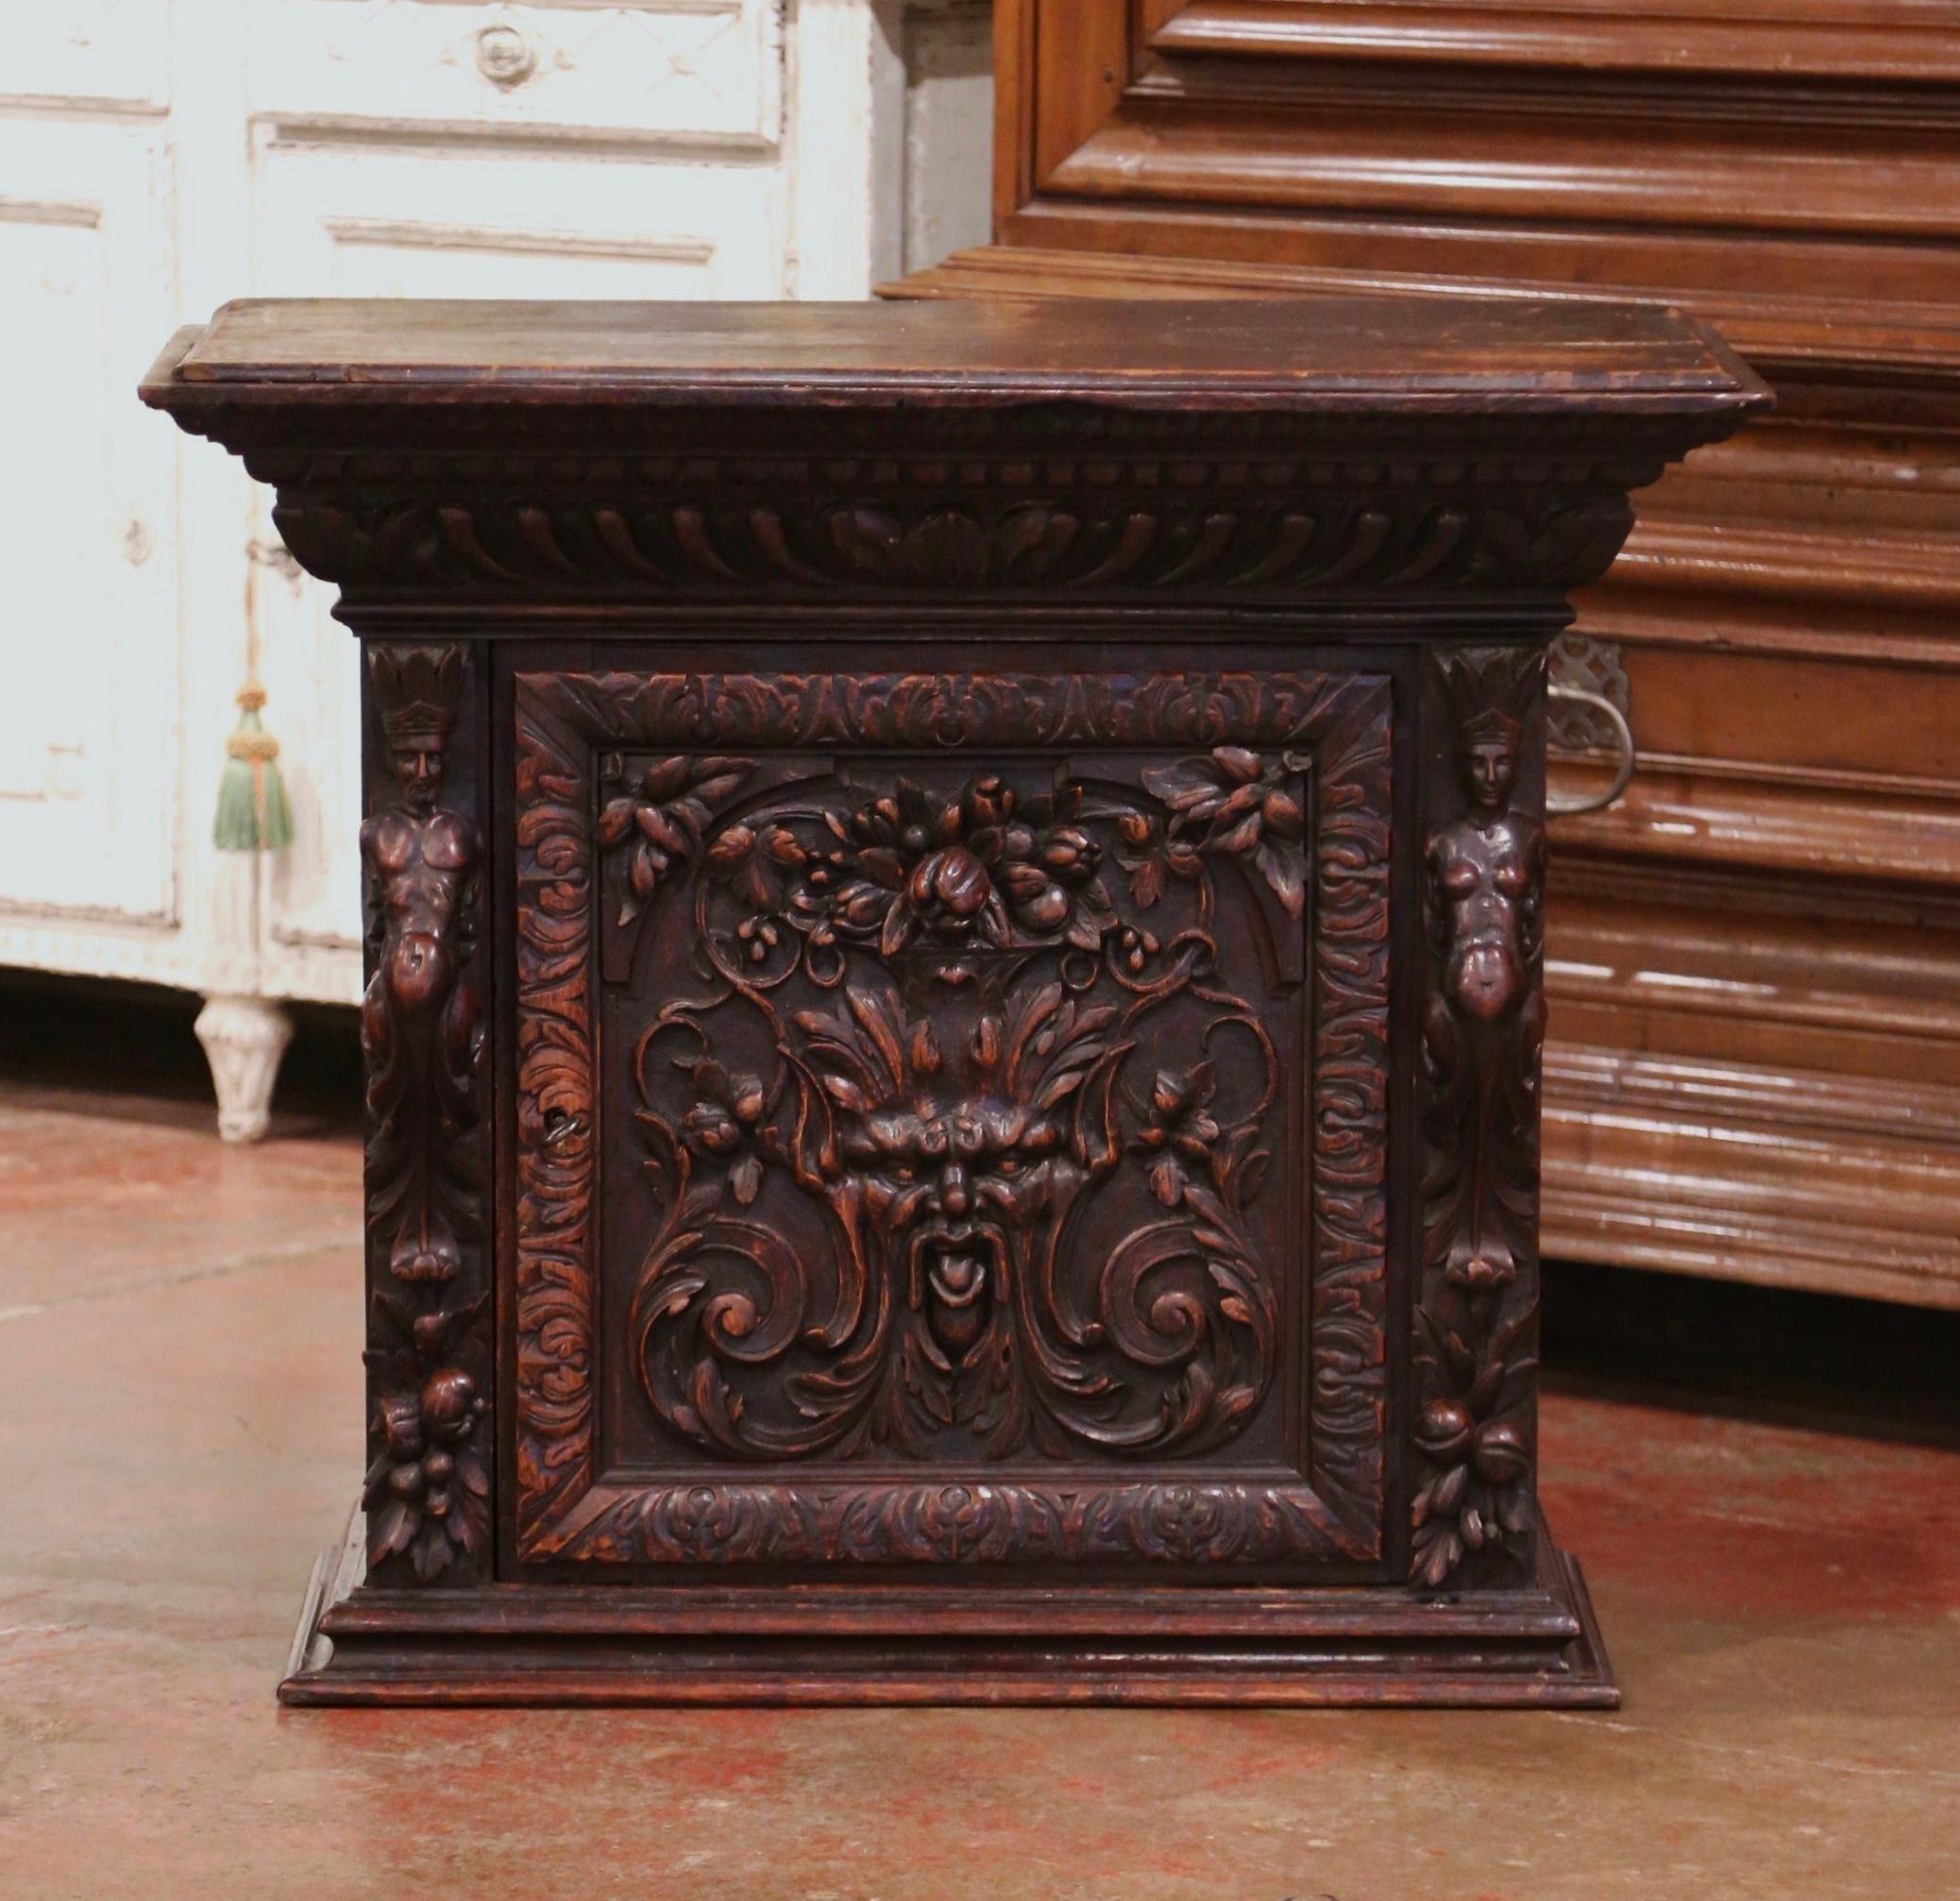 Crafted in Italy circa 1780, the cabinet is heavily carved with figure and floral motif. It features a central door opening to inside shelving. The Gothic style cabinet is in excellent condition with a rich walnut patina. Hooks in the back for easy